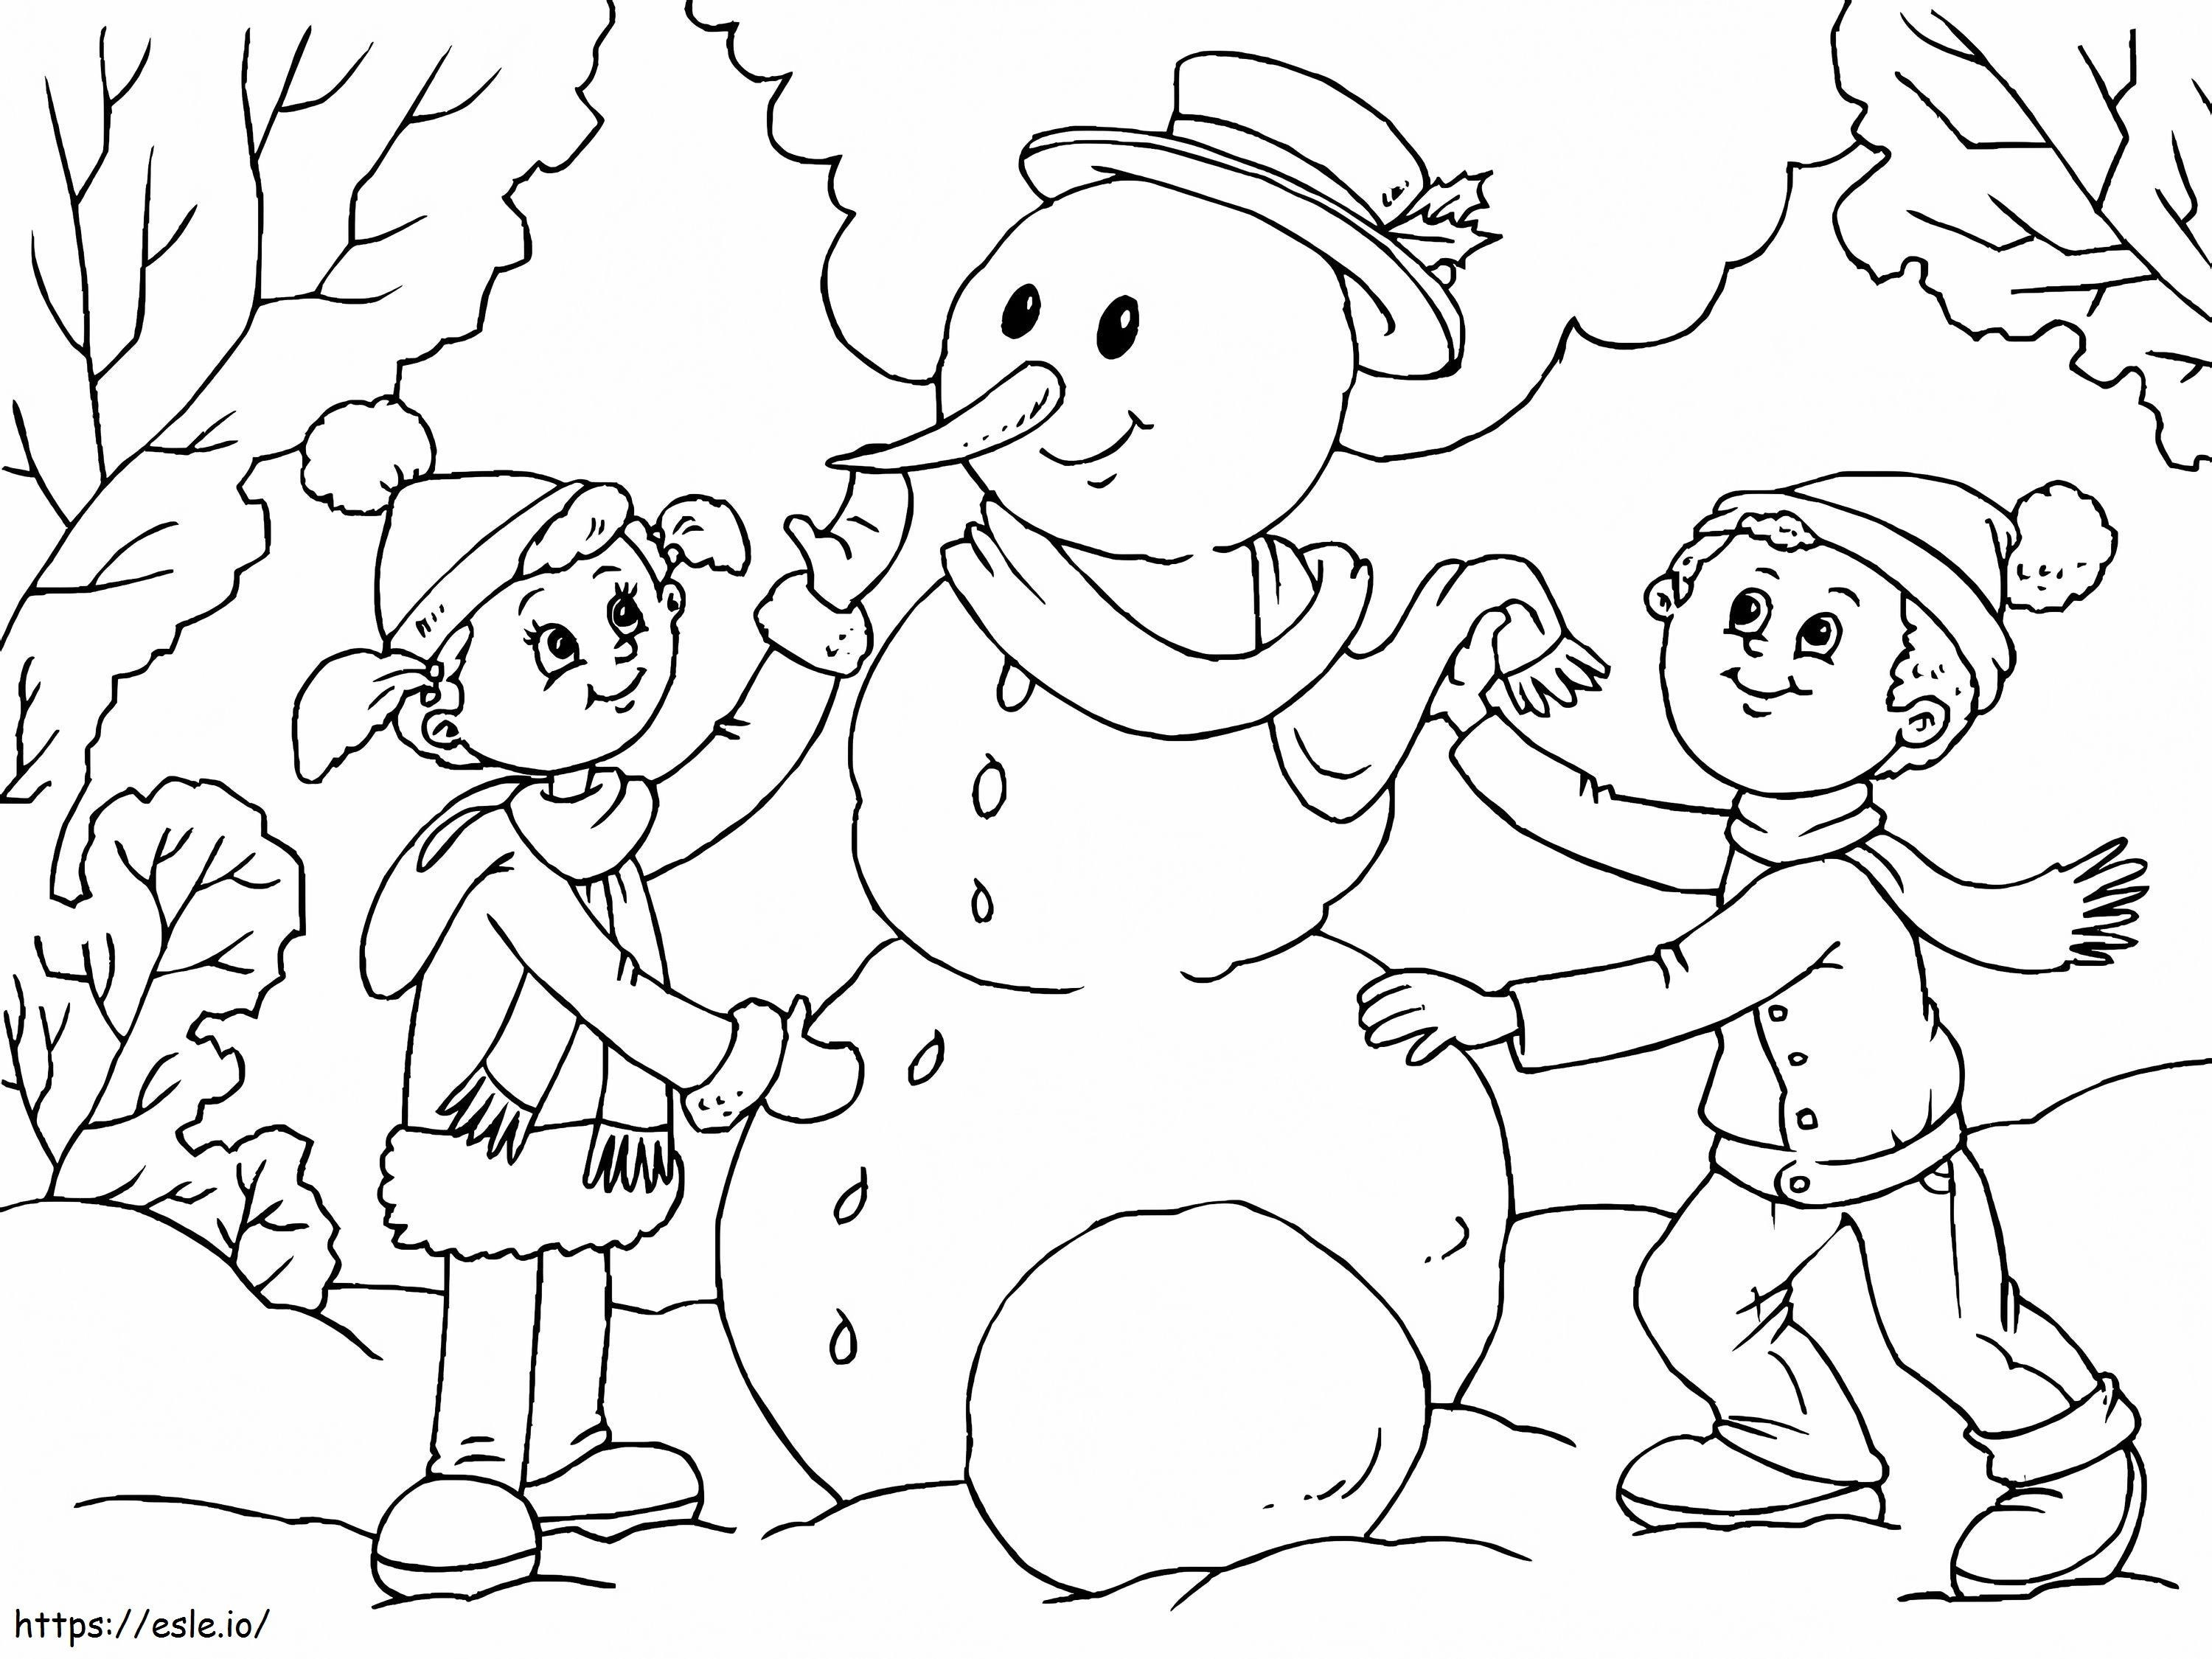 1528683614 Buildasnowmana4 coloring page